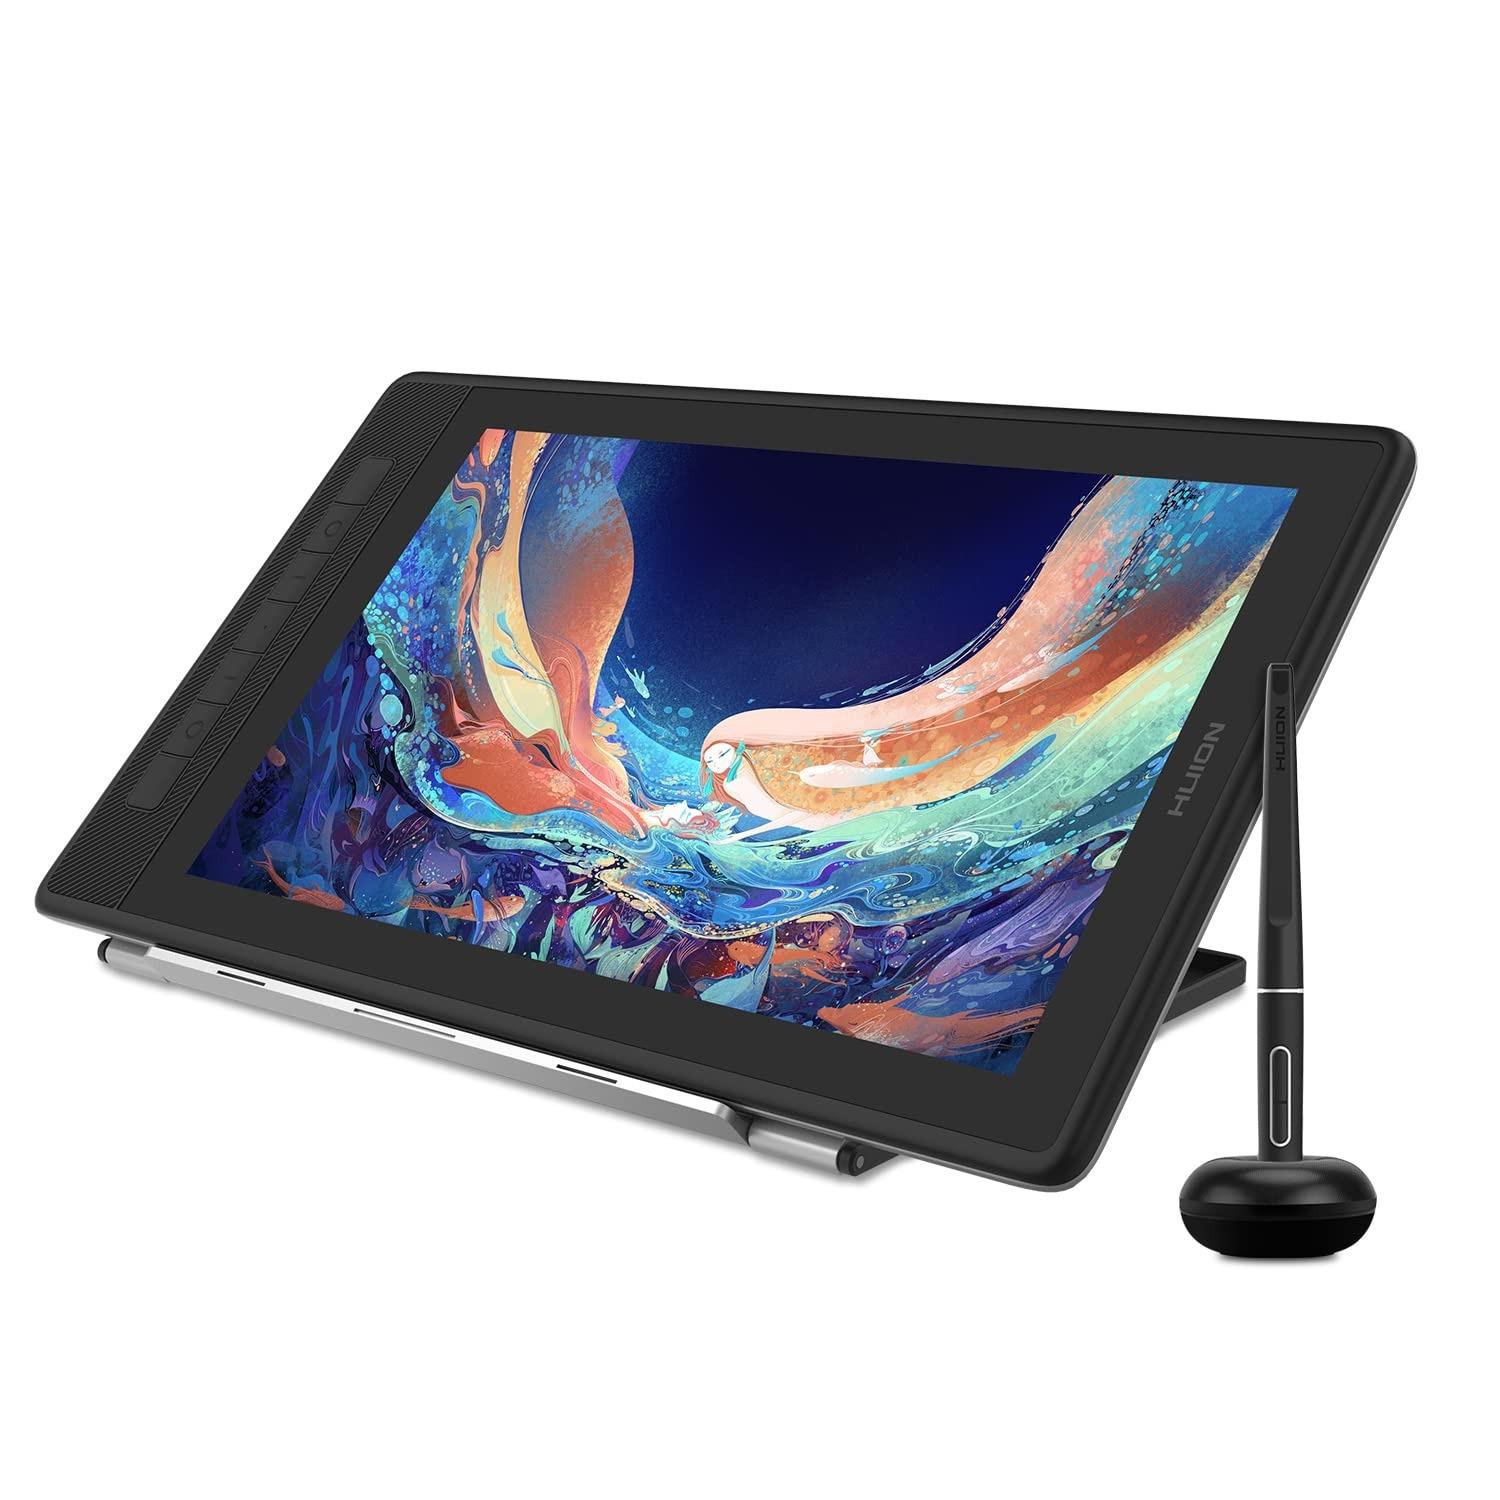 Display　IPS　sRGB　Tablet　Drawing　Pressure　Tilt　Buy　Computech　Stand　HUION　Graphics　Store　KAMVAS　13　USB-C-　Stylus　Laminated　Pro　8192　(QLED)　(2.5K)　with　Pen　Full　Pen　Battery-Free　145%　13.3inch